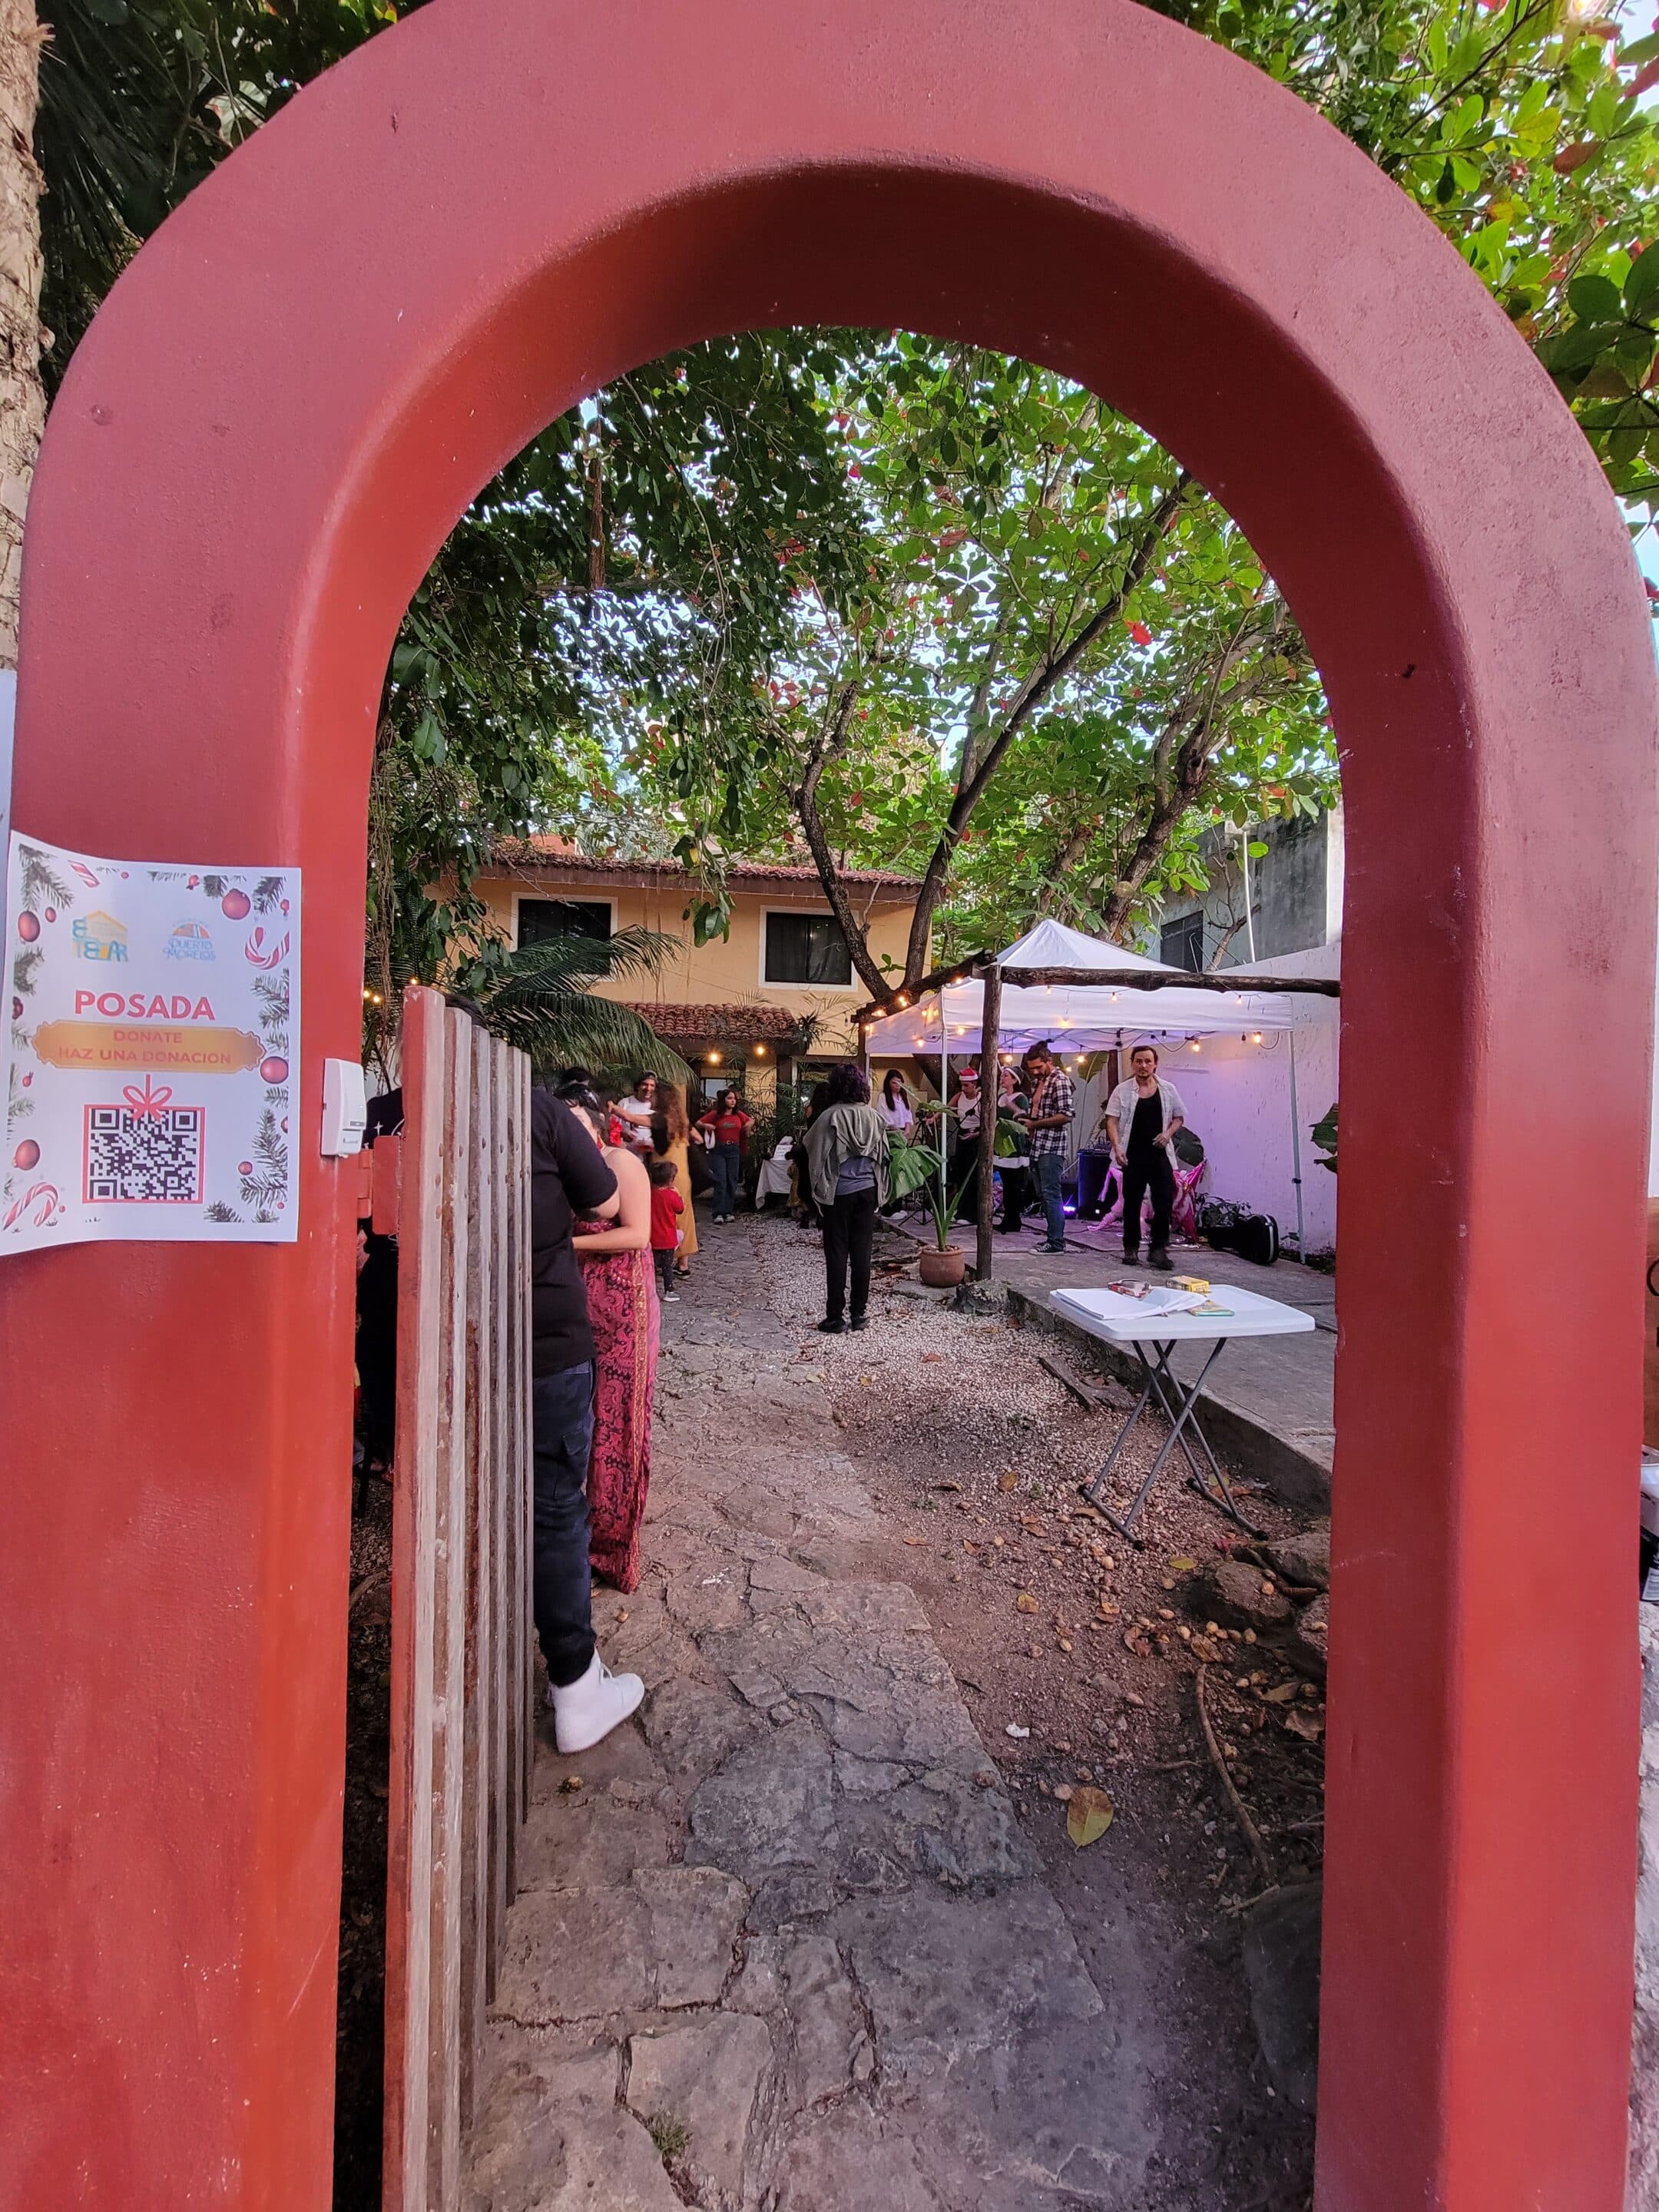 Photo of a a red archway with an open gate and a small sign stating "Posada". Beyond the archway, groups of people, a white tent, and a house are visible.